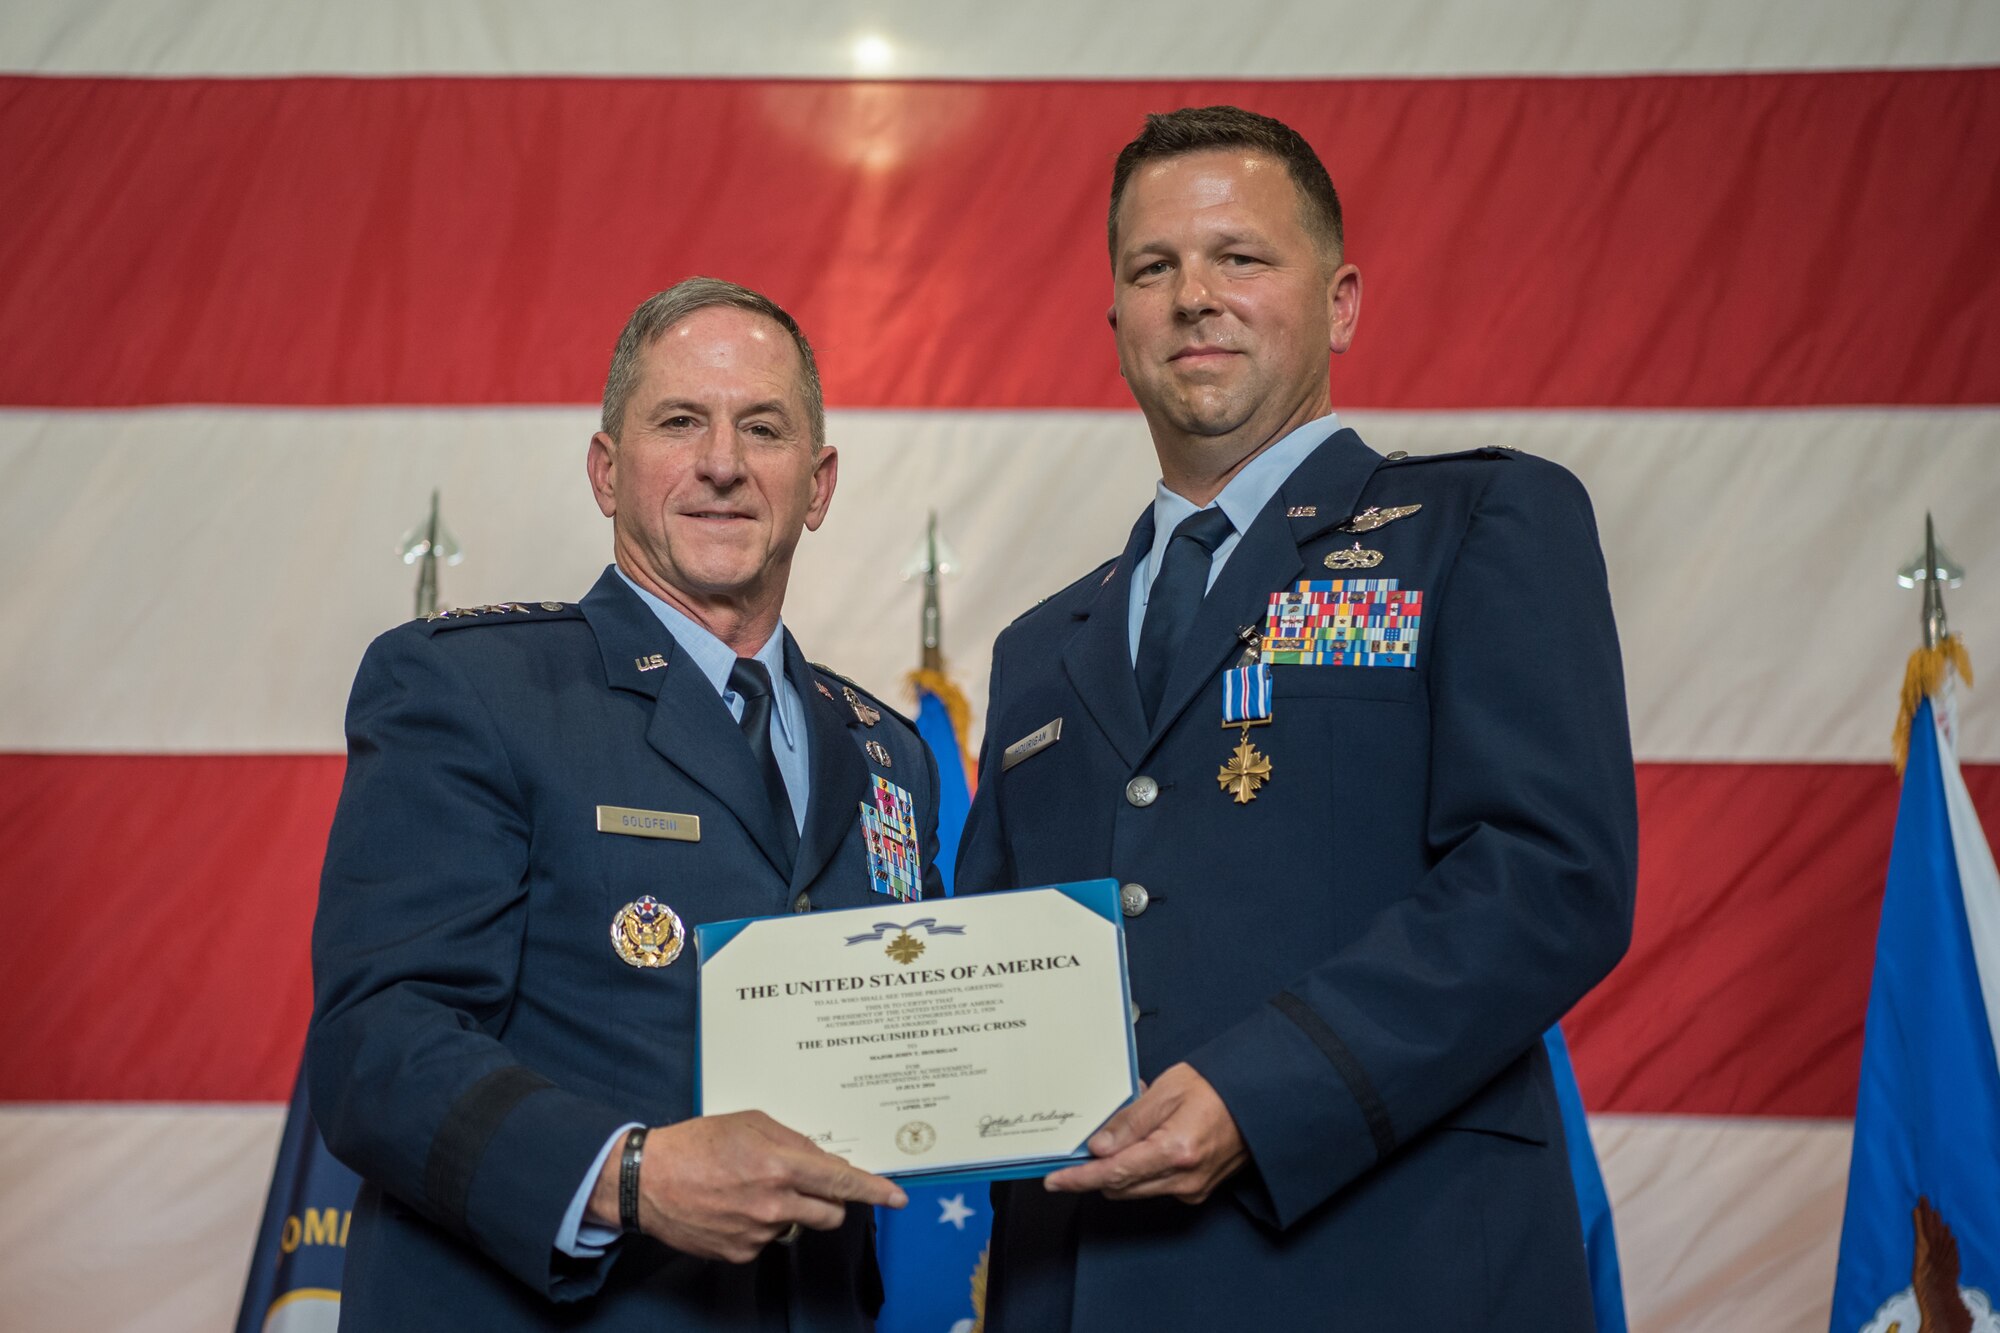 Lt. Col. John "J.T." Hourigan (right), a pilot for the 123rd Airlift Wing, receives the Distinguished Flying Cross from Gen. David L. Goldfein, Air Force chief of staff, during a ceremony at the Kentucky Air National Guard Base in Louisville, Ky., Aug. 10, 2019. Hourigan earned the award for preventing a catastrophic, in-flight mishap that would have resulted in the loss of aircraft and crew if not for his decisive action. (U.S. Air National Guard photo by Staff Sgt. Joshua Horton)